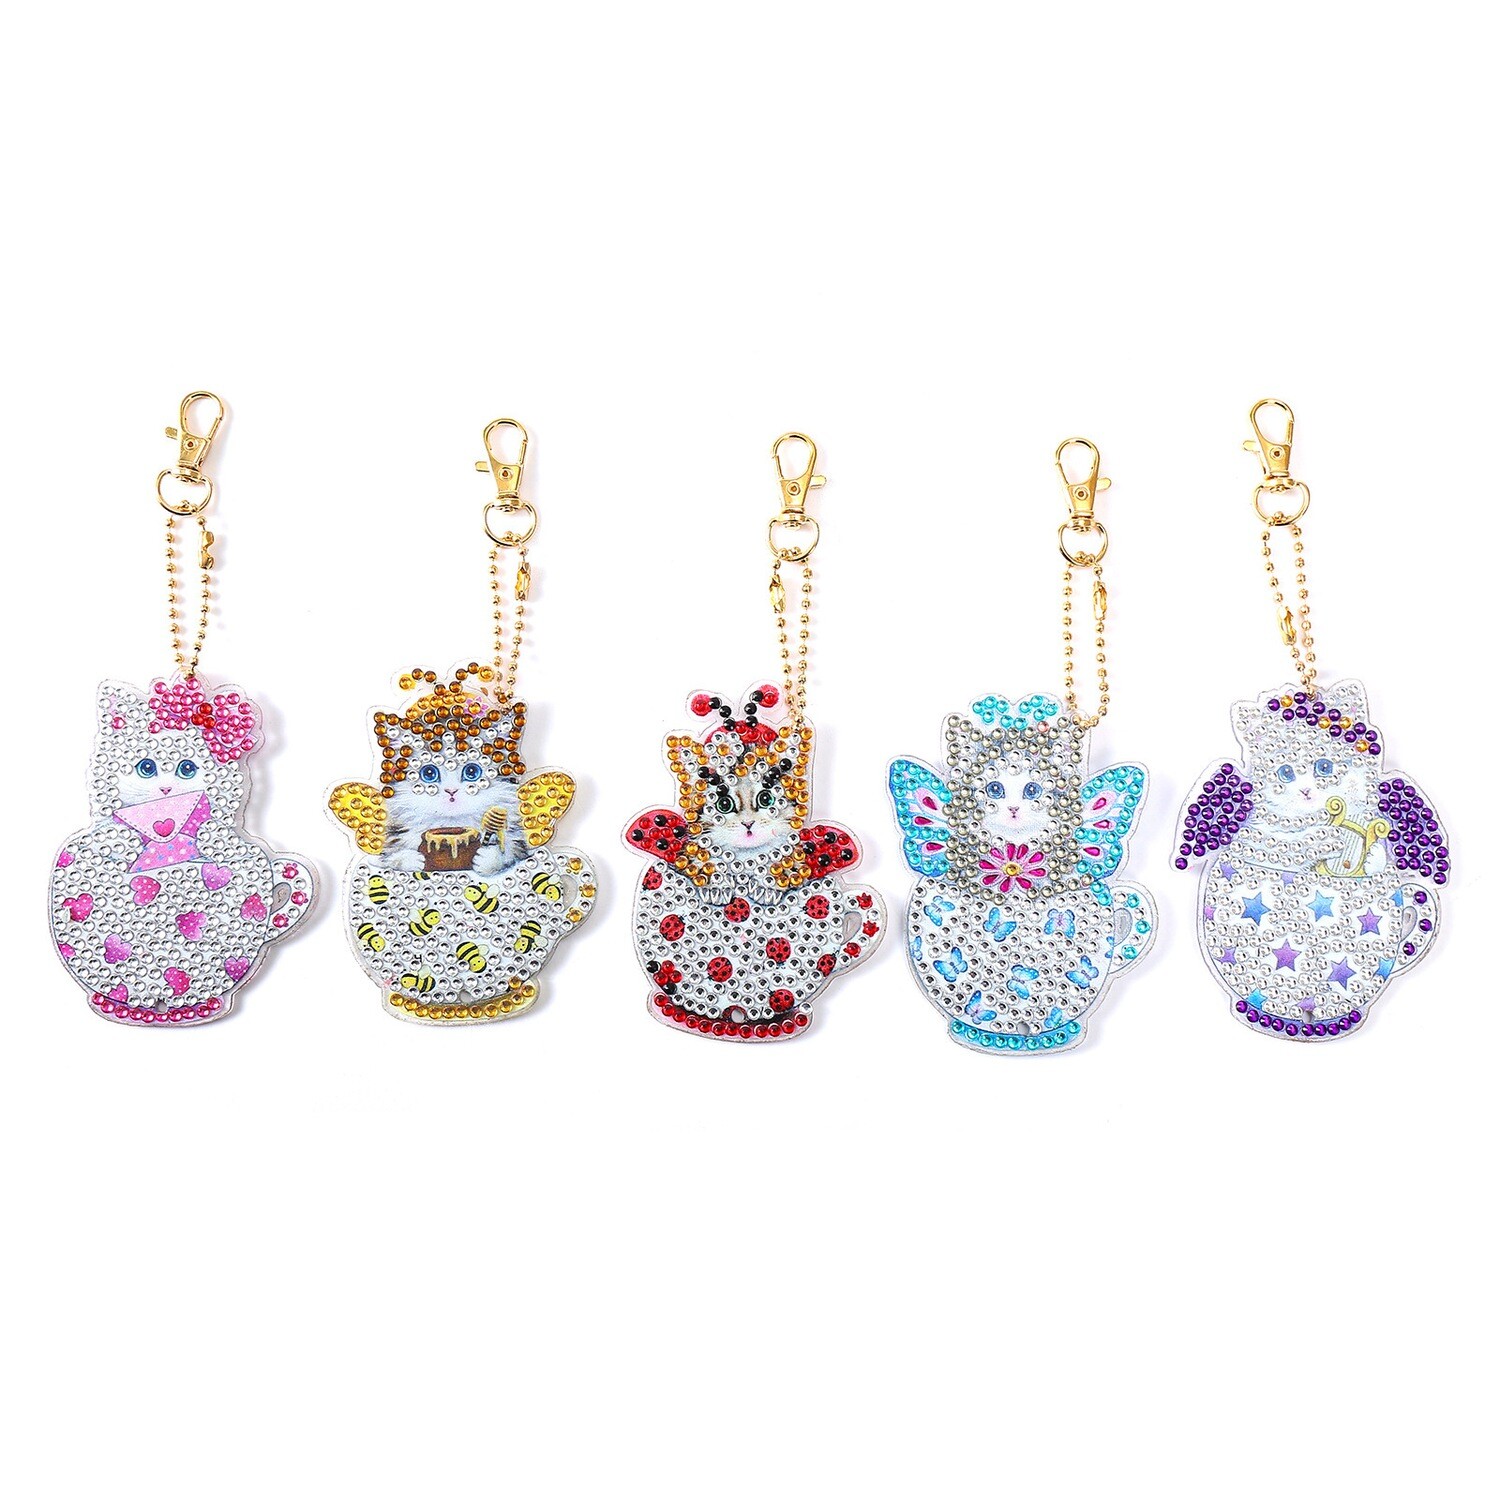 Keychains - CUP KITTENS - Set of 5  - Diamond Painting Kit